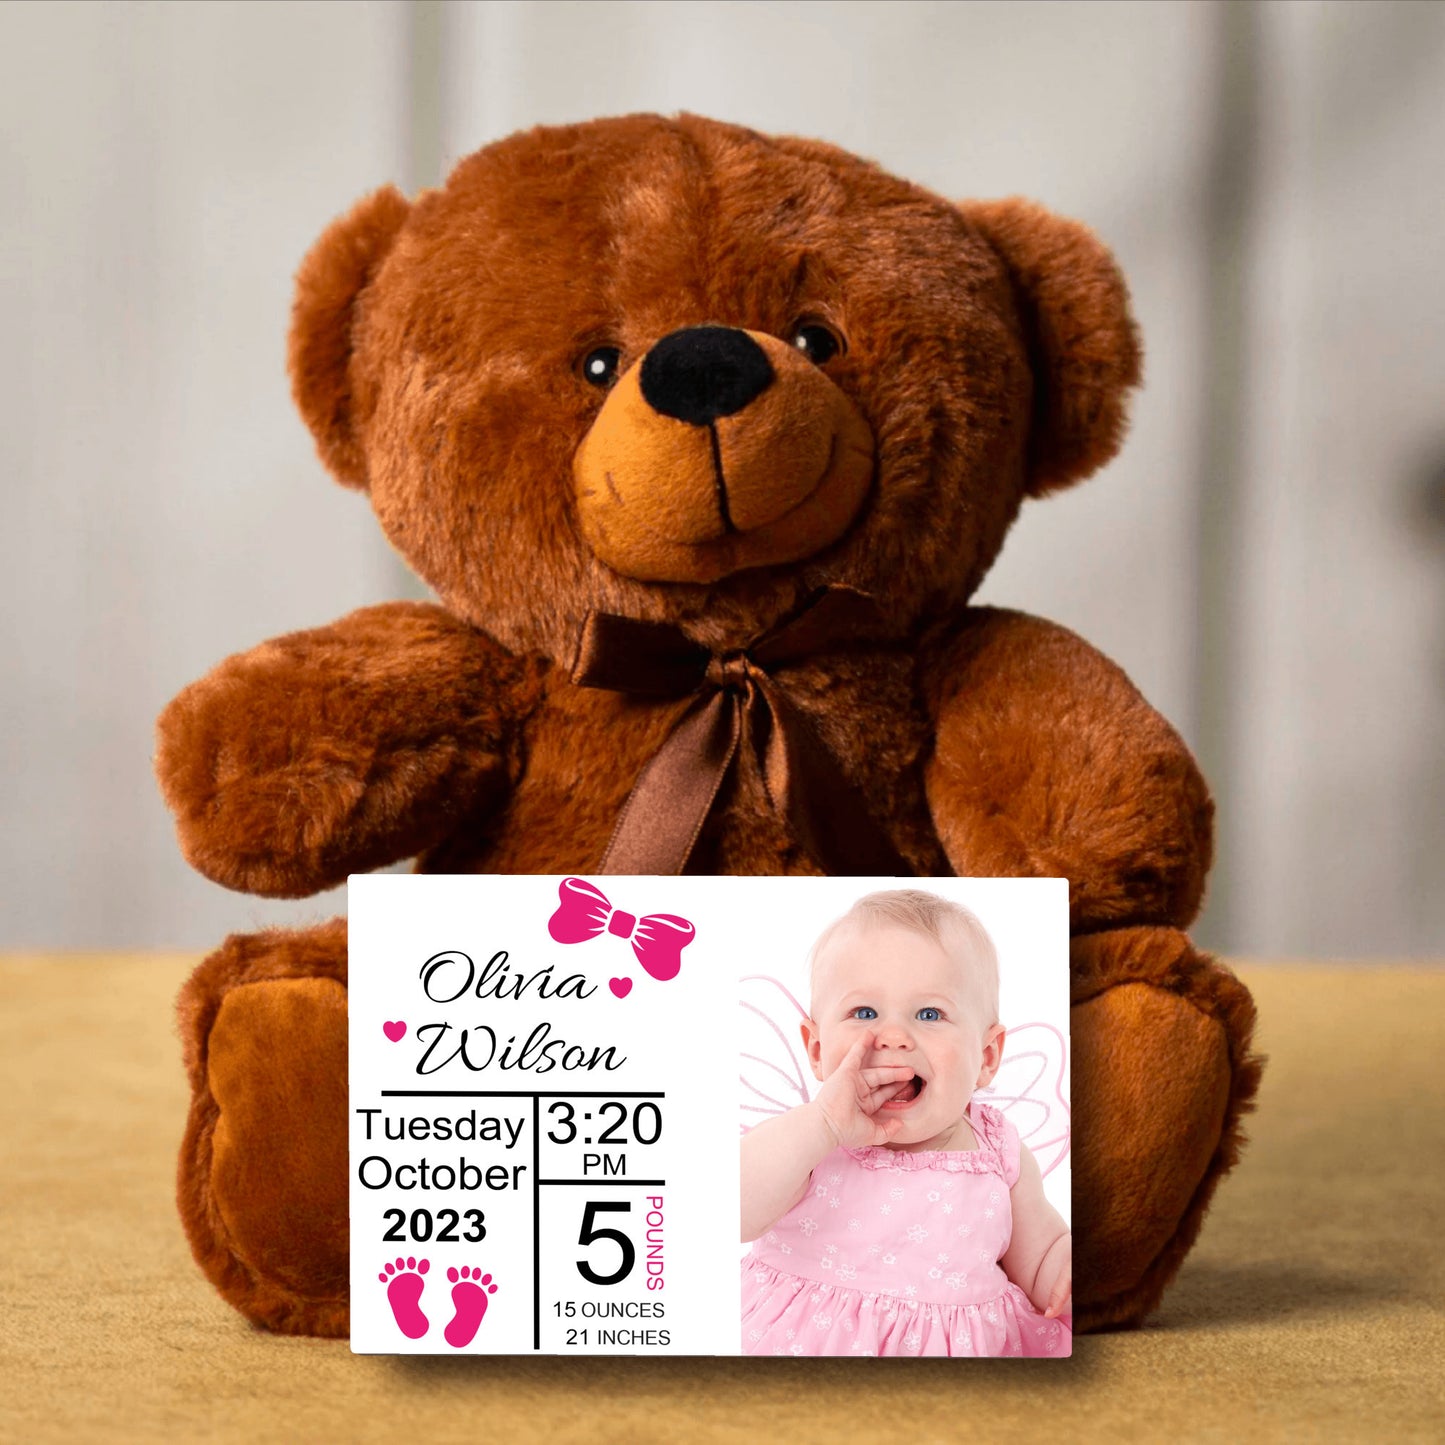 Birth Announcement Gift for Baby, Teddy Bear Stuffed Animal, Personalized Name And Photo Newborn Gift, Baby Keepsake with Birth Stats, Baby Shower Gift